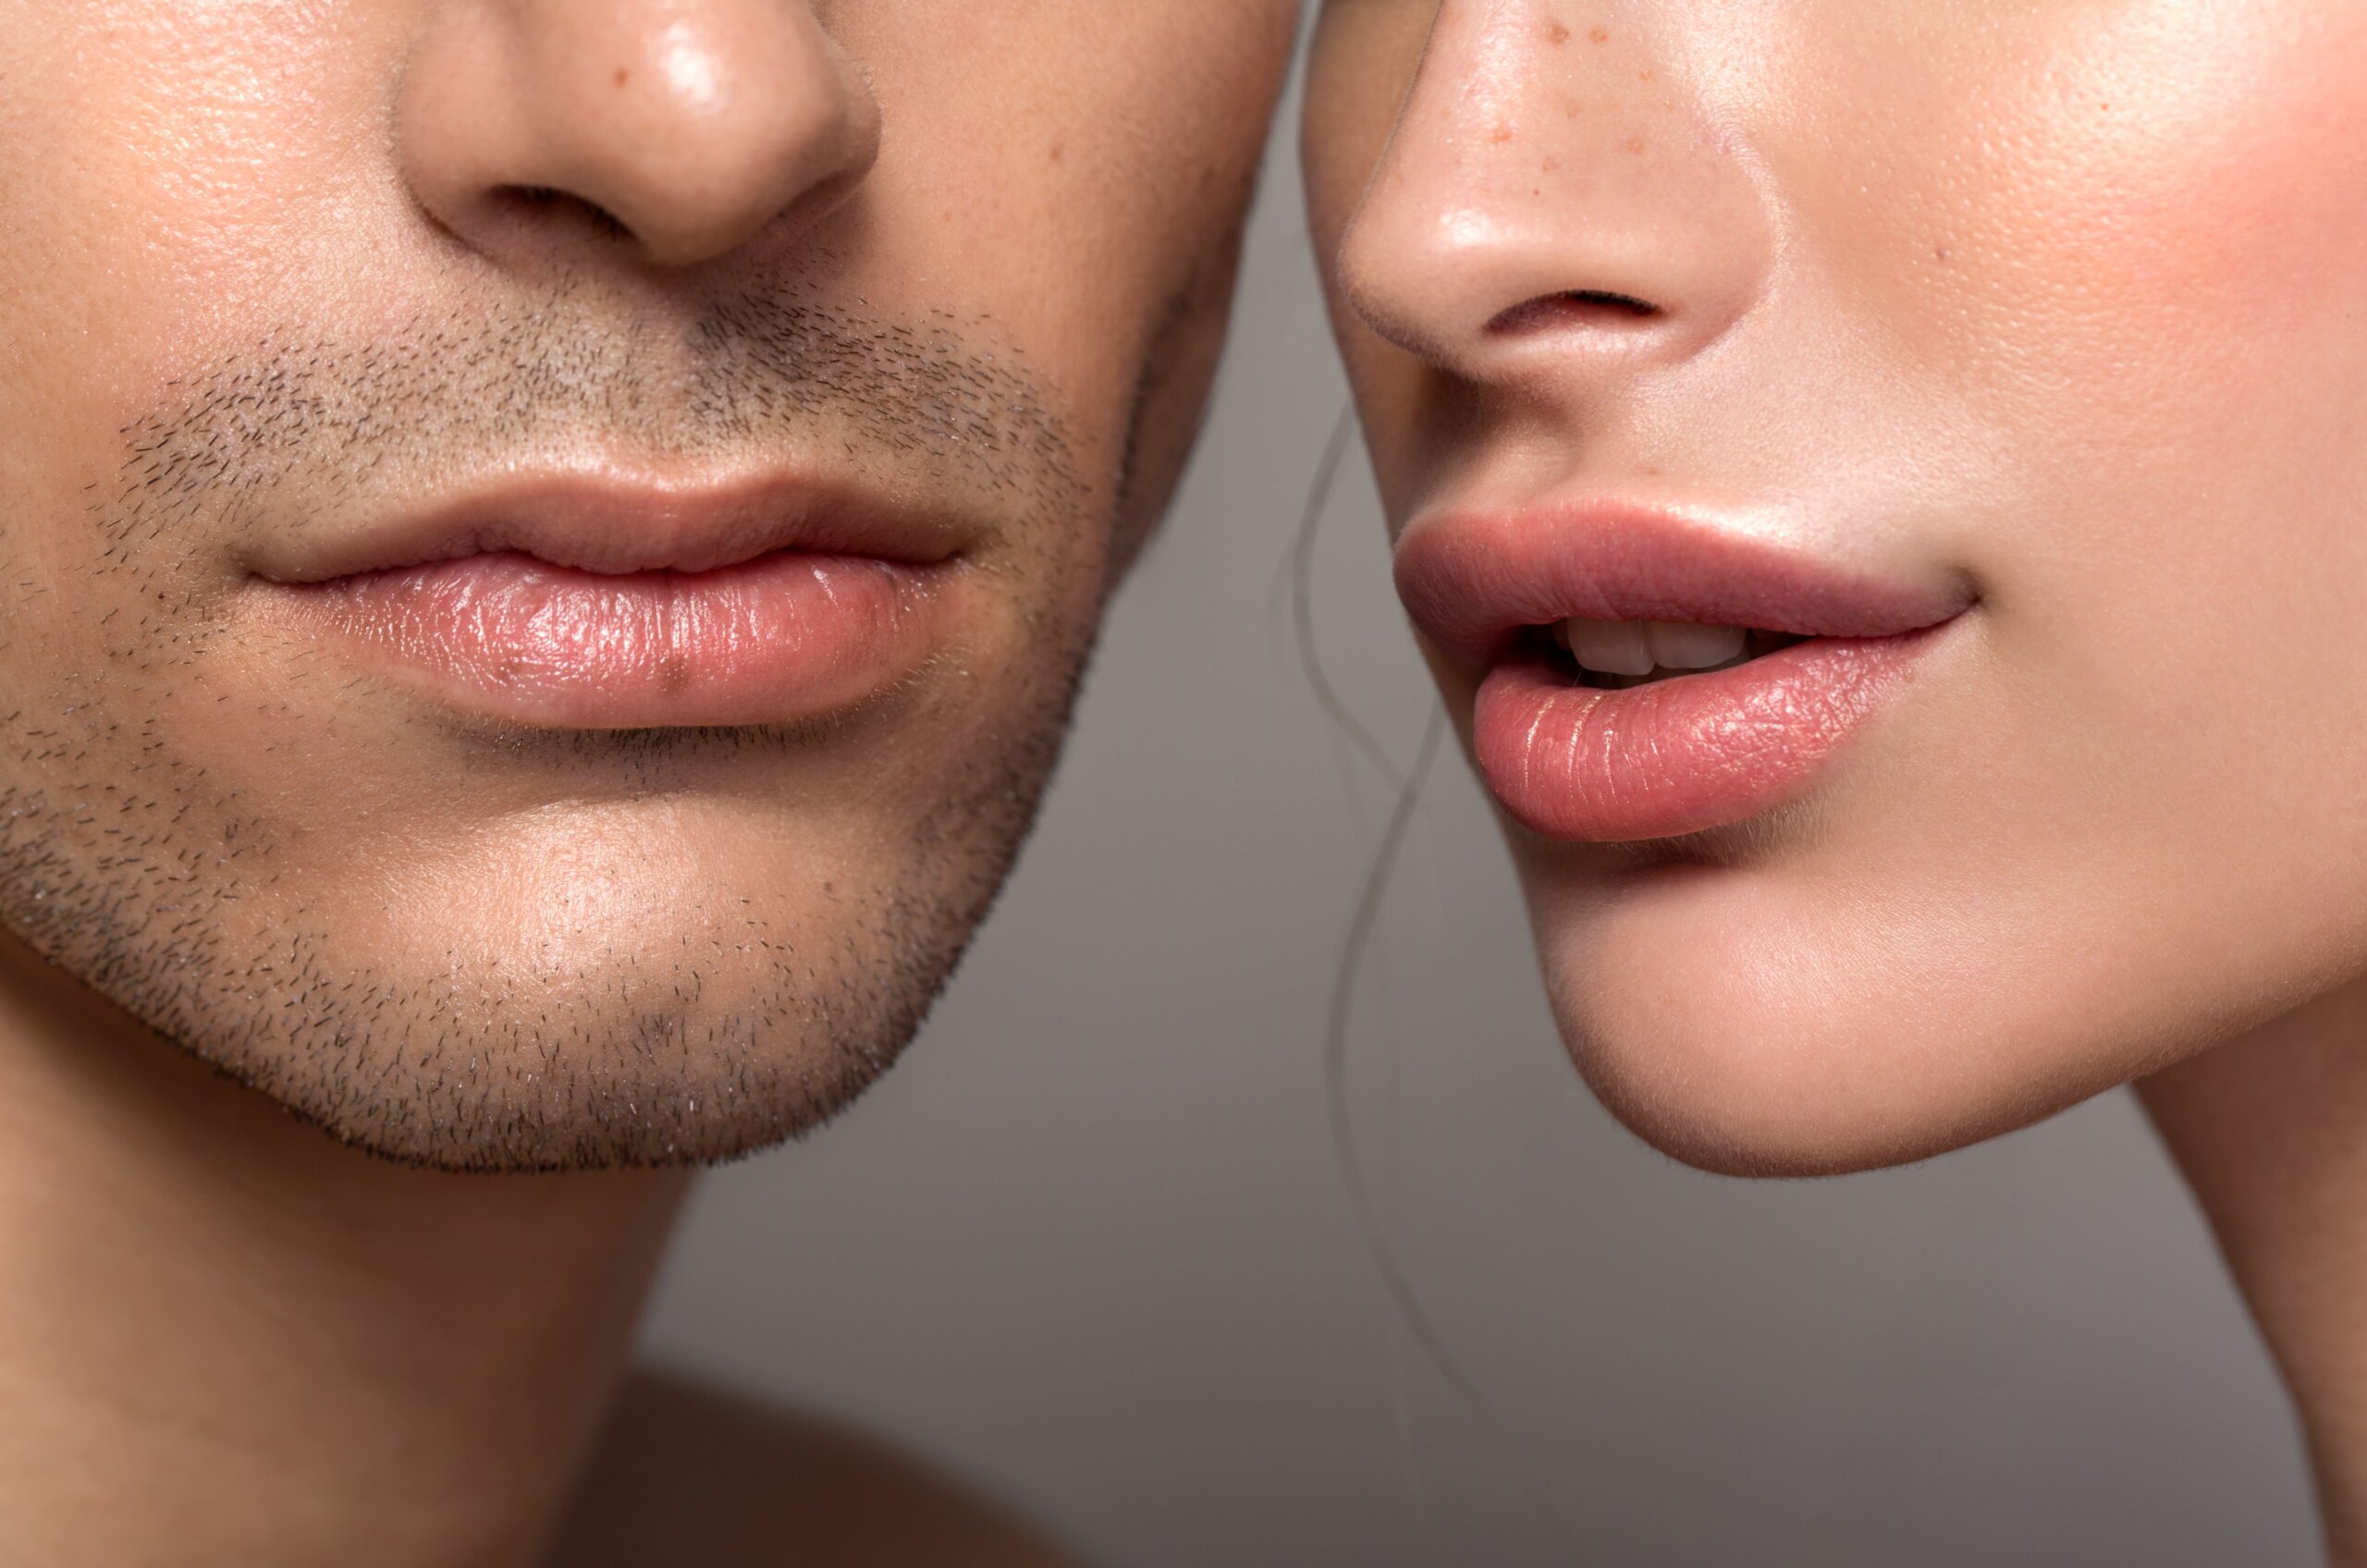 Man and woman's faces after microneedling and chemical peels.